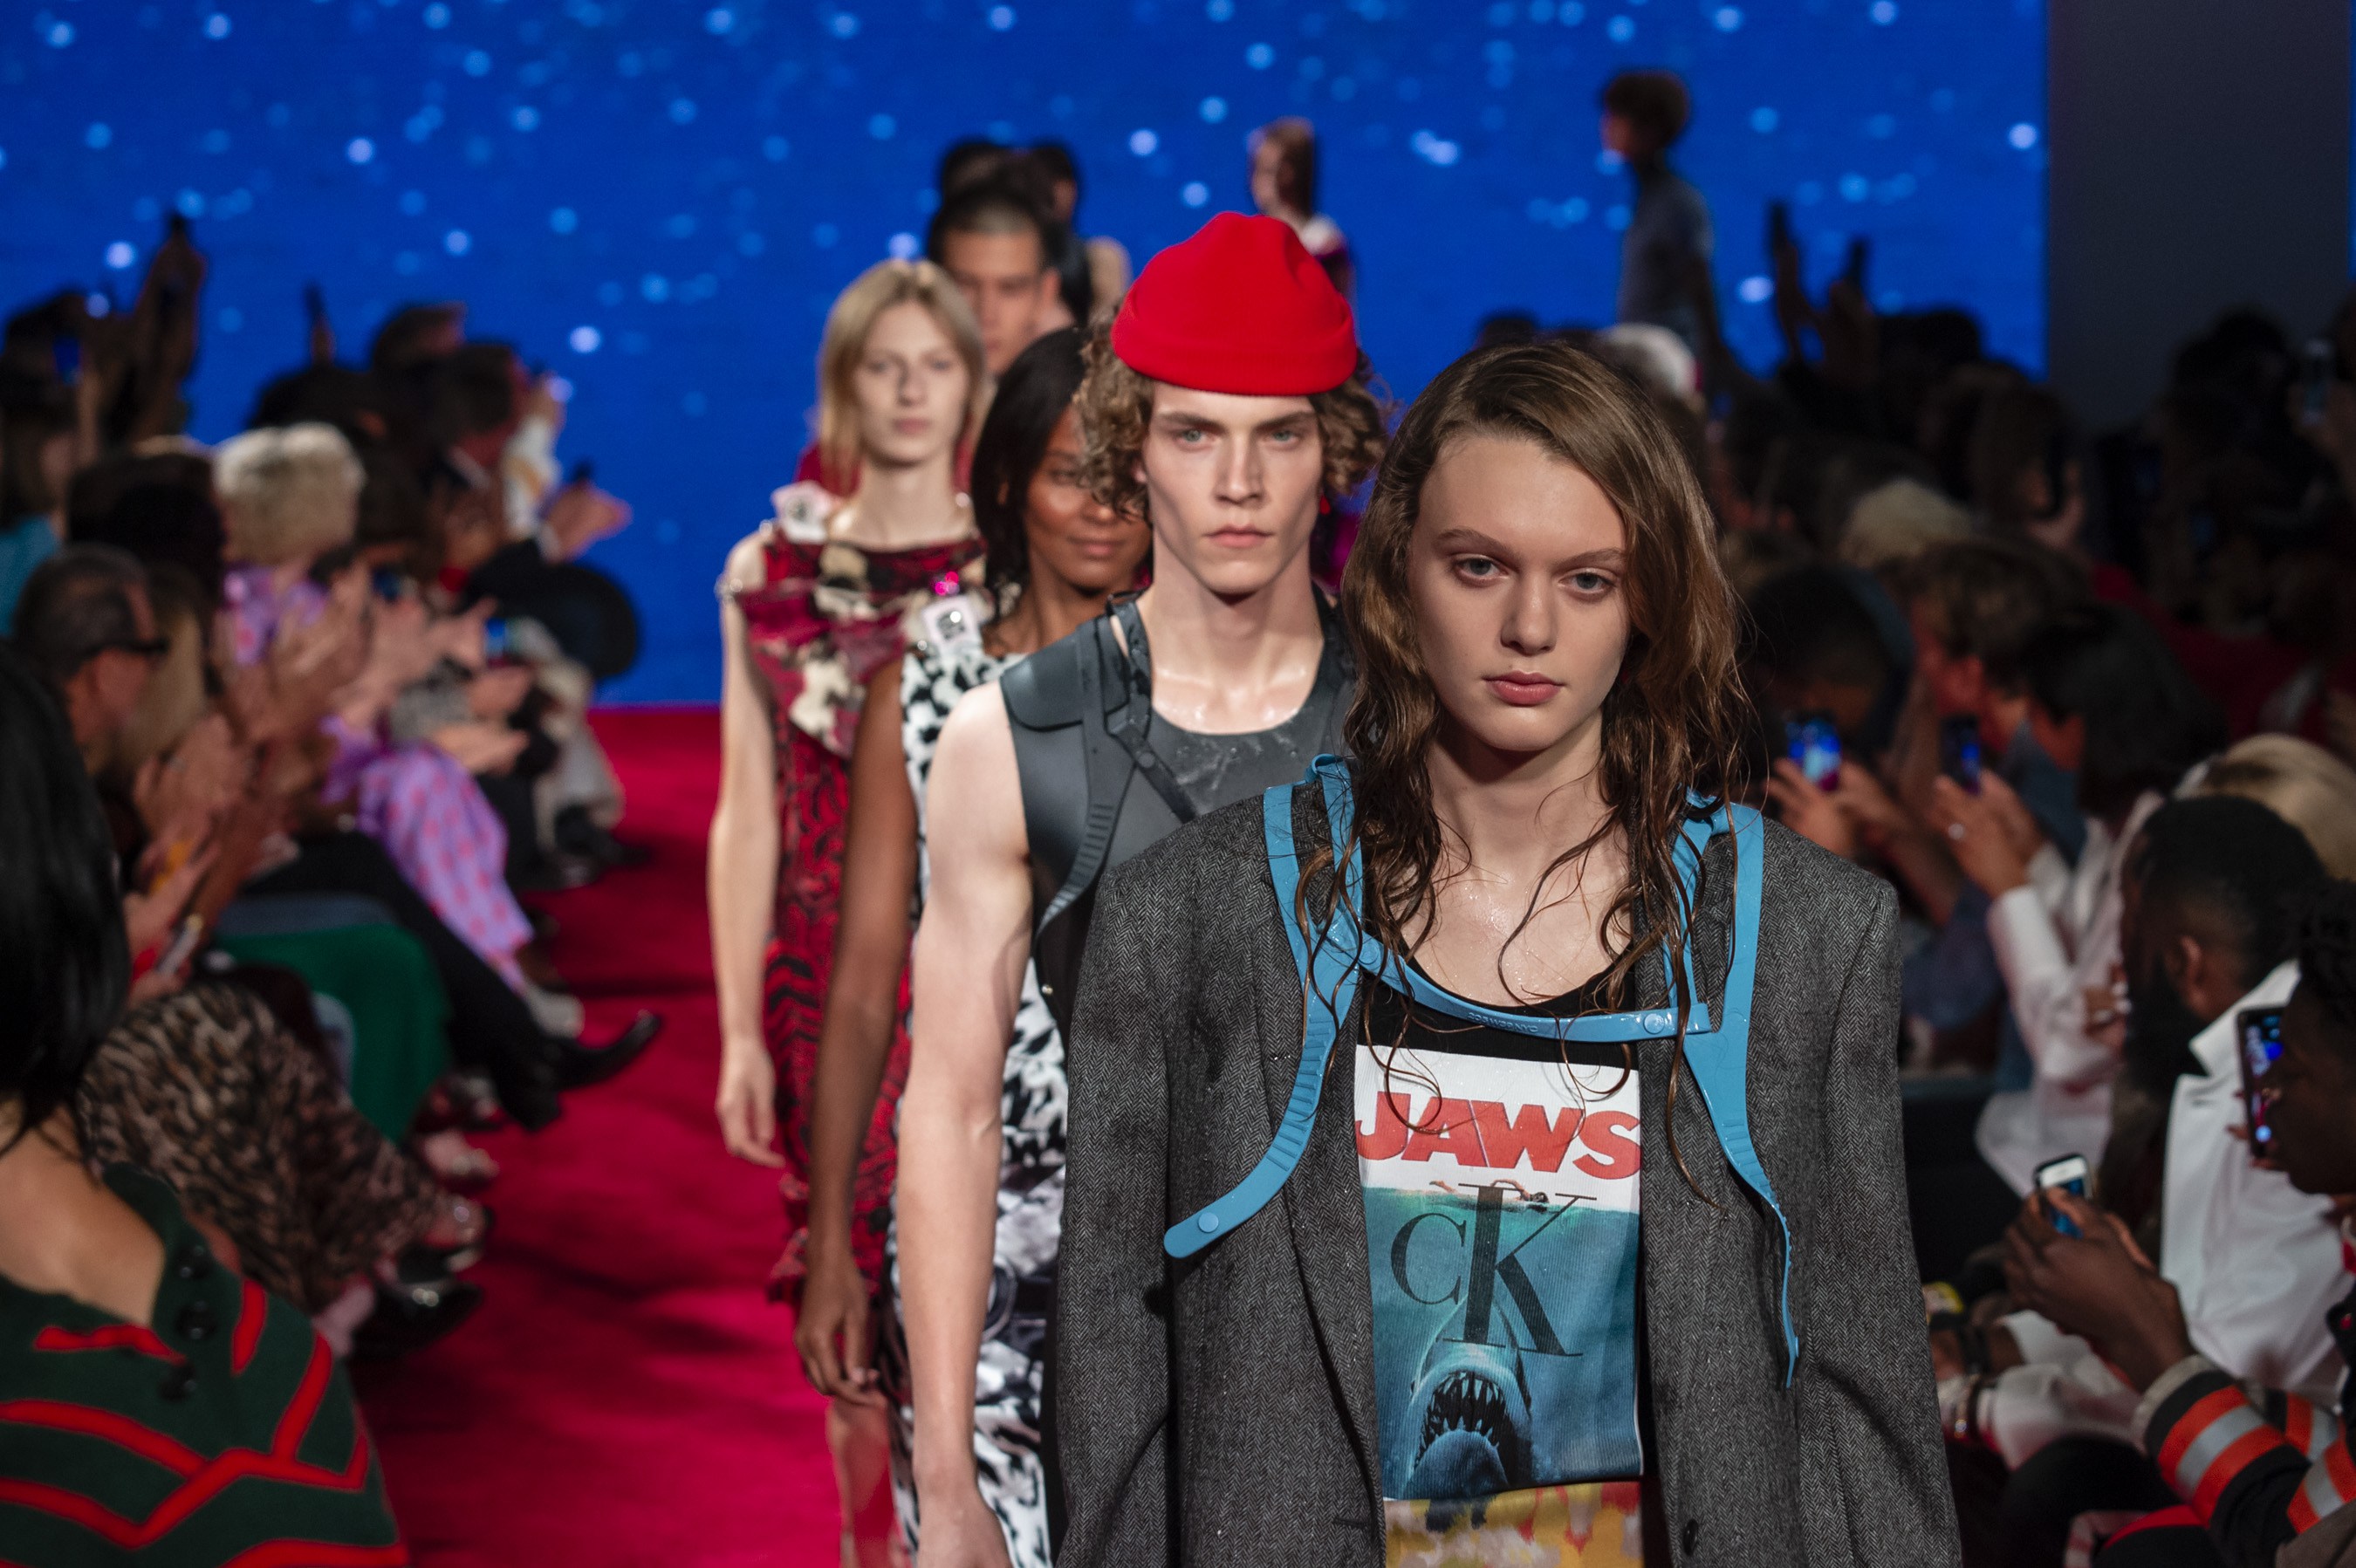 Top 10 New York Spring 2019 Collections and Fashion Shows - The Impression